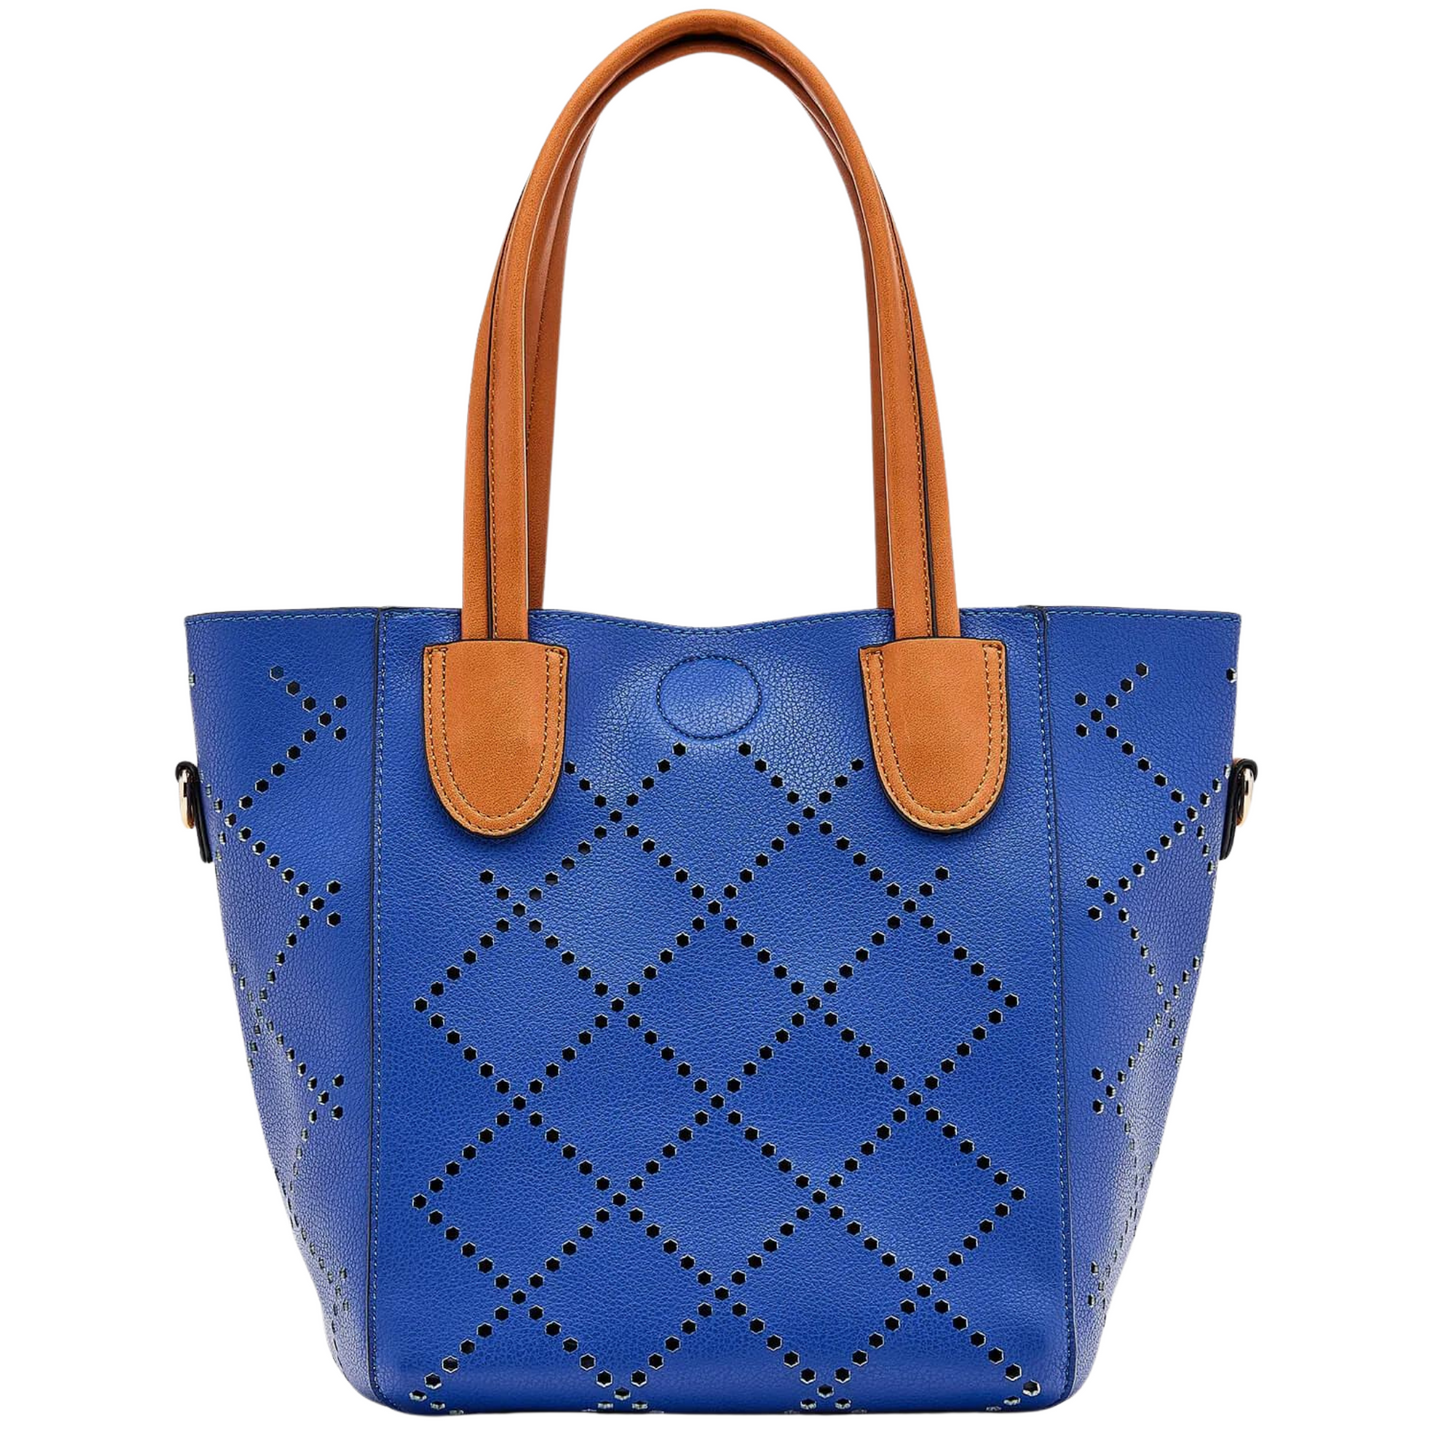 A front view of the ocean blue bag showing the light brown leather staps and the unique detailing.